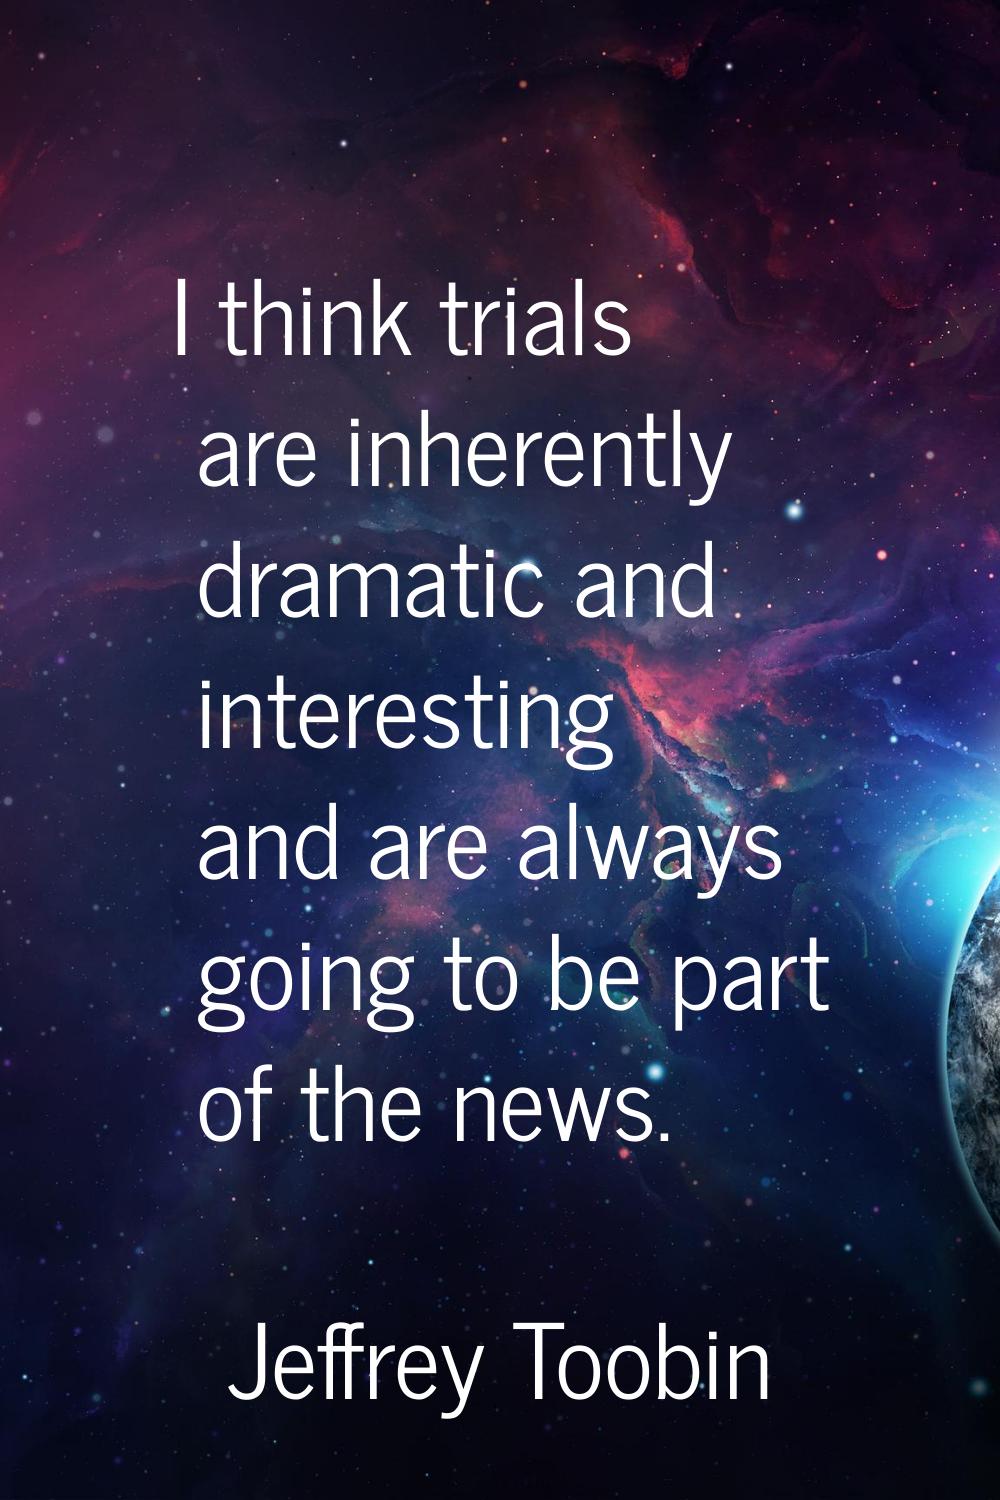 I think trials are inherently dramatic and interesting and are always going to be part of the news.